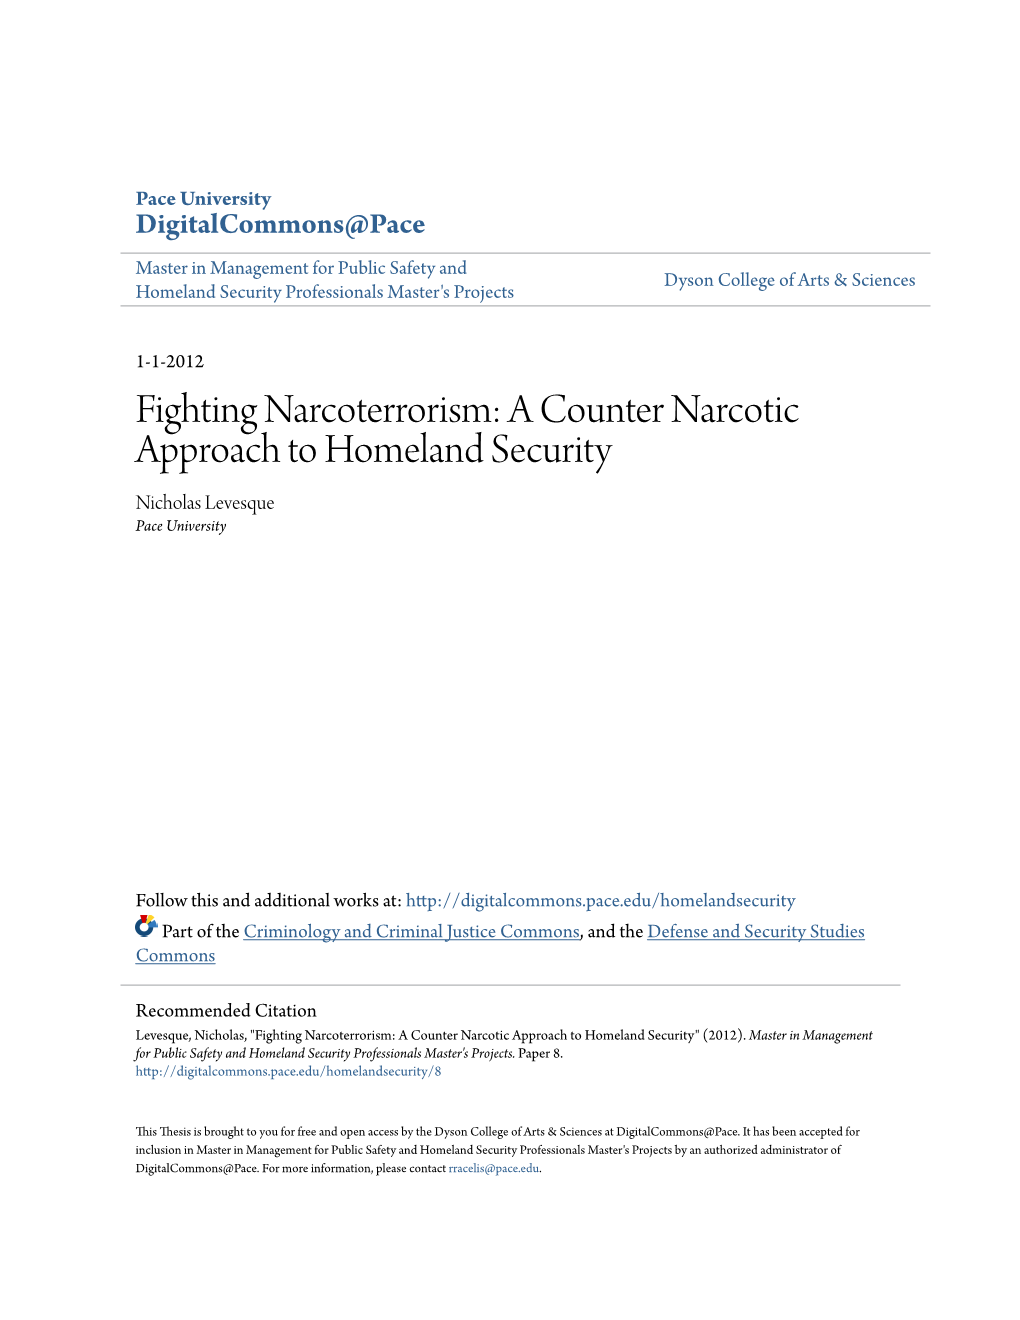 Fighting Narcoterrorism: a Counter Narcotic Approach to Homeland Security Nicholas Levesque Pace University